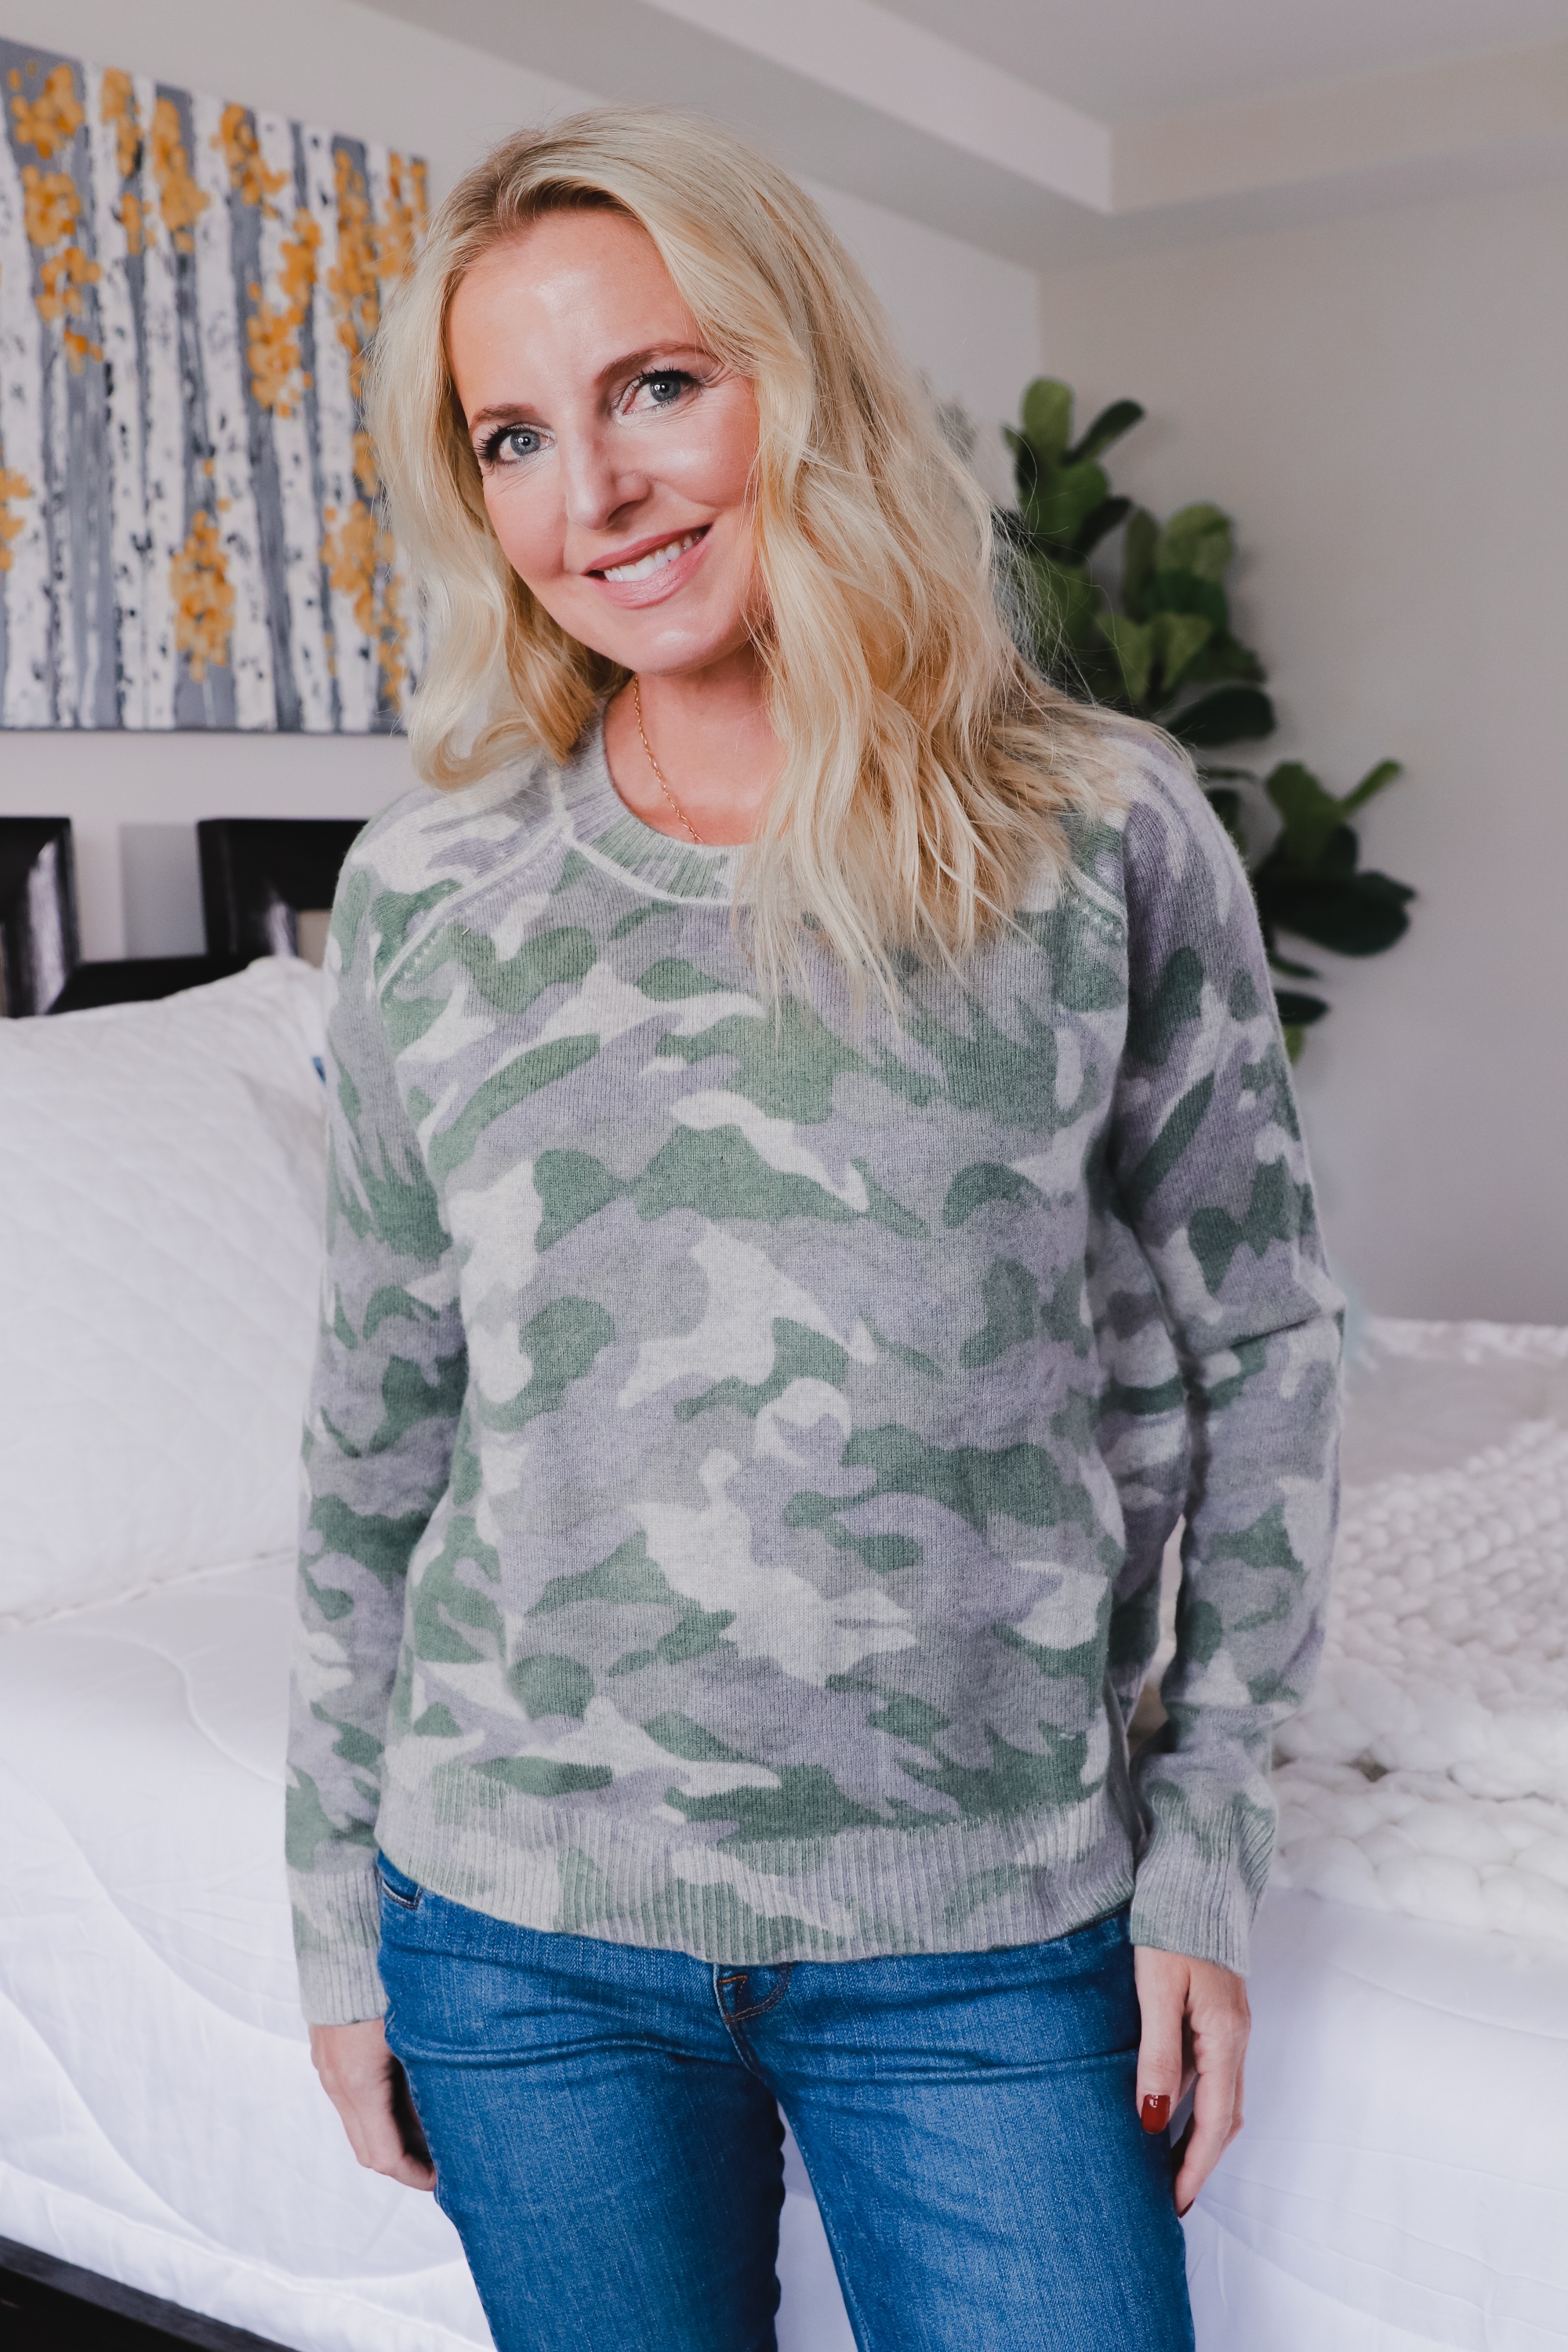 coziest fall sweaters, cozy fall sweaters, fall sweaters, womens fall sweater,Aqua Cashmere Sweater, Erin Busbee of Busbee Style wearing a green camo cashmere sweater by Aqua from Bloomingdale's untucked from her J Brand Natasha jeans in Telluride, Colorado